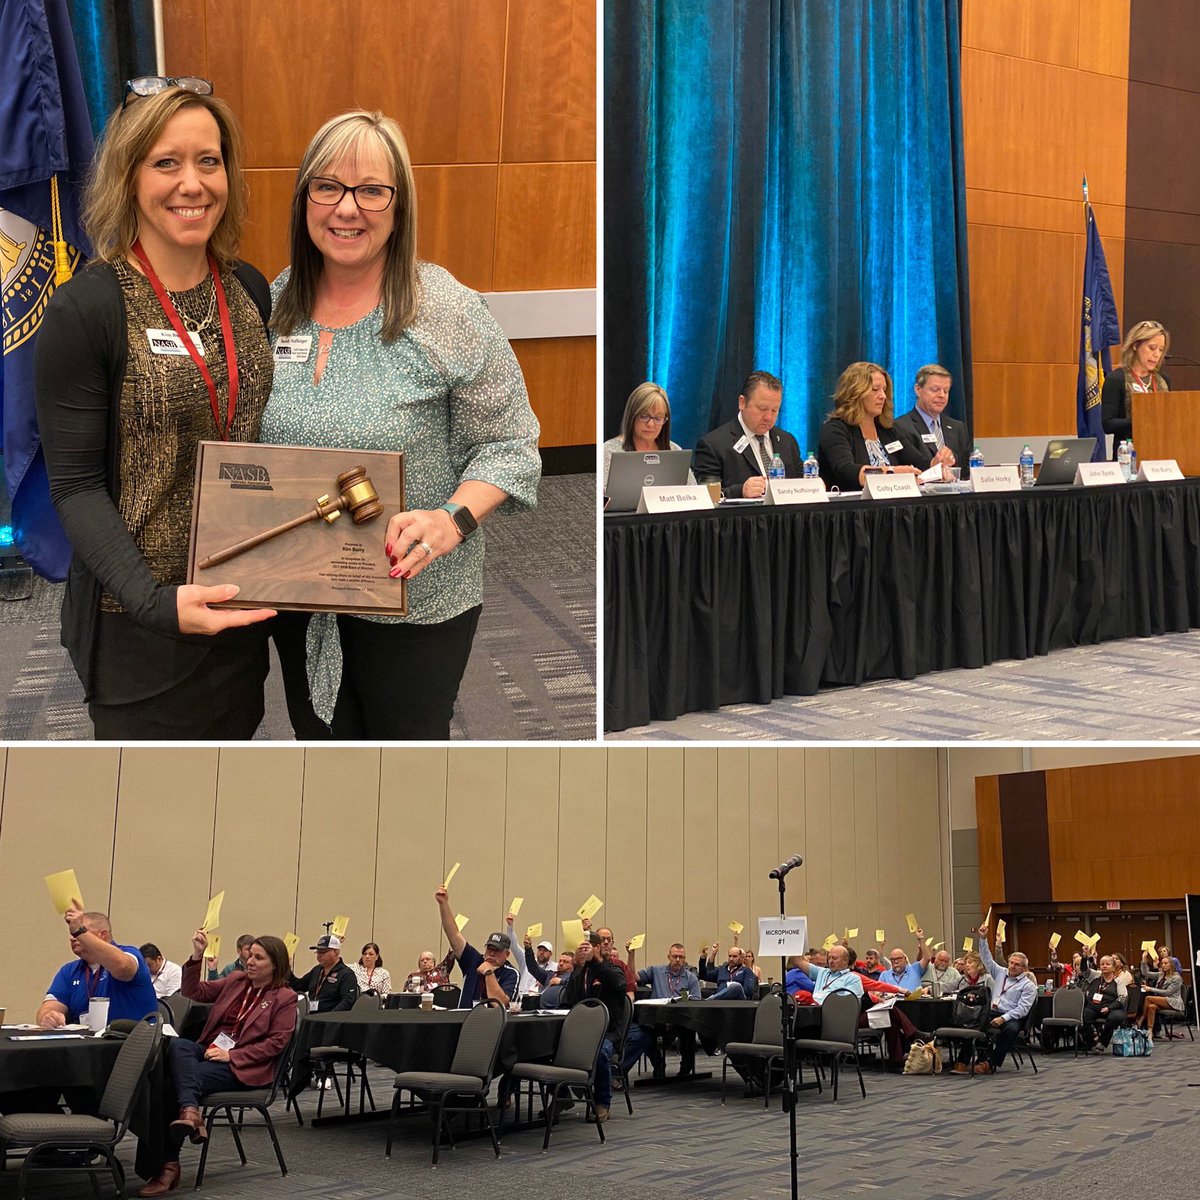 The ayes have it! We have completed the 2023 Delegate Assembly which saw approval of the bylaws, positions & resolutions, as well as the passing of the presidential gavel from Kim Burry to Sandy Noffsinger! #liveNASB #weLIVEhere